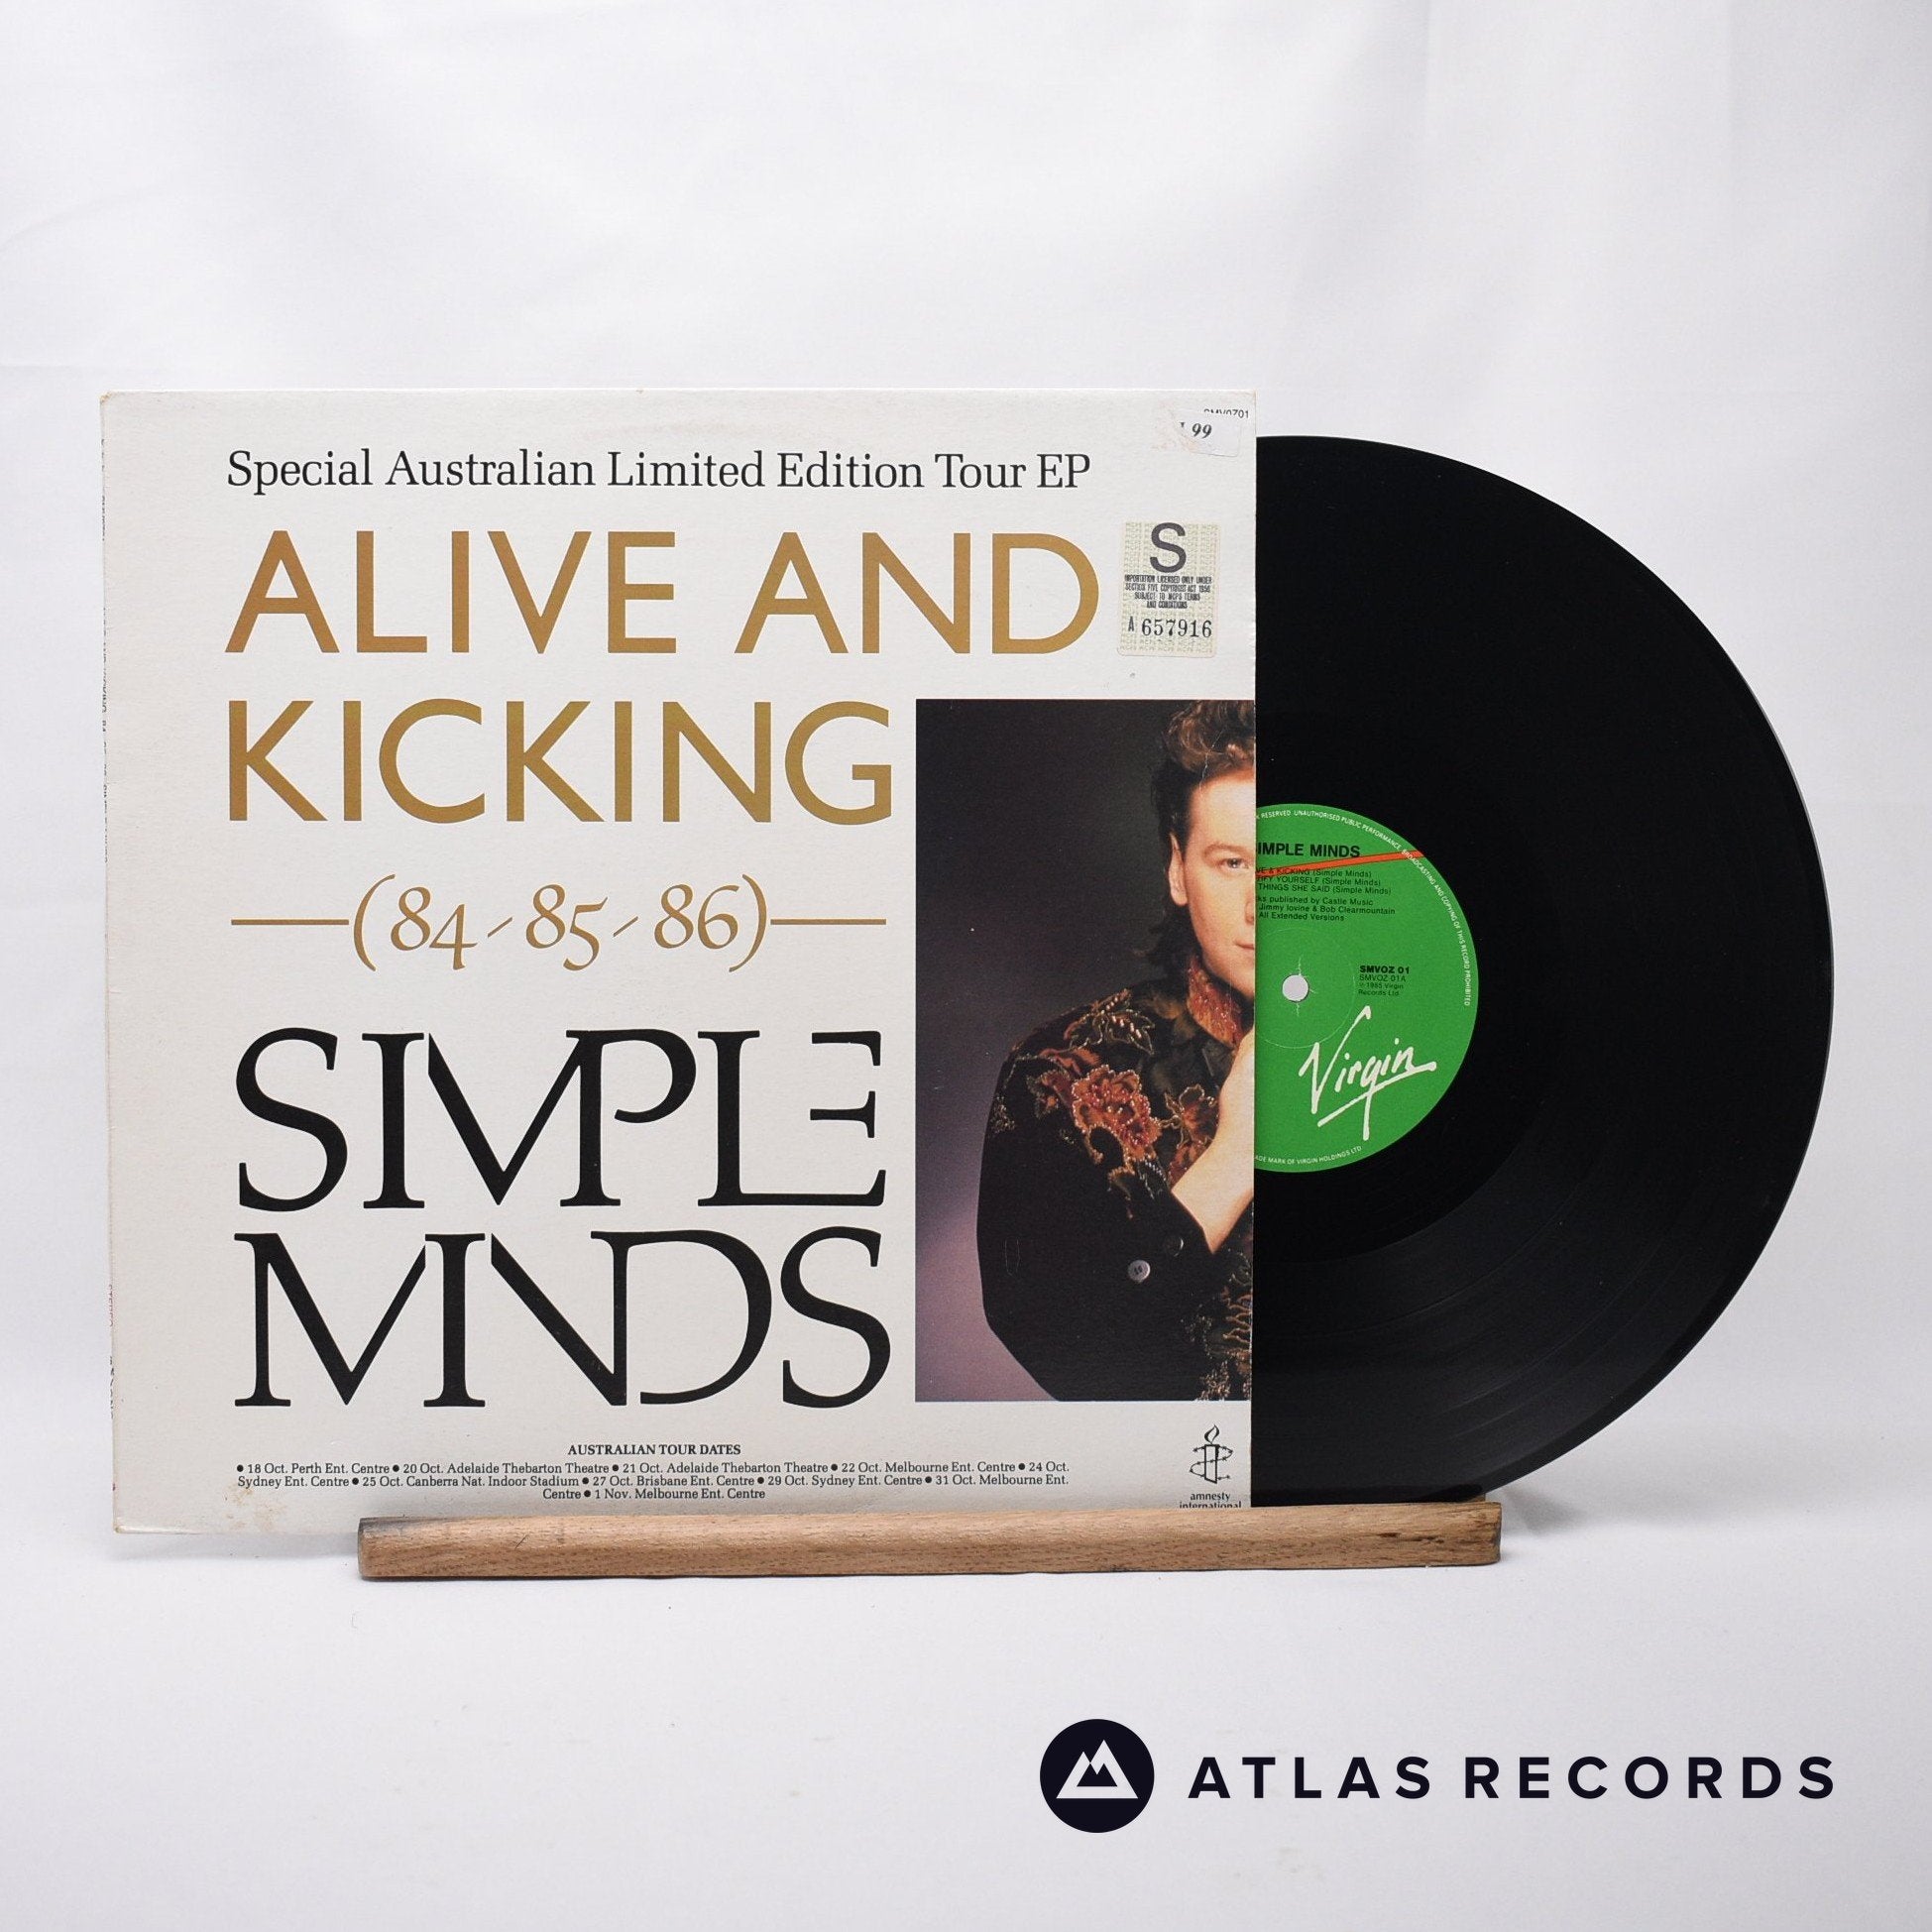 Simple Minds - Alive And Kicking -(84/85/86)-, Releases